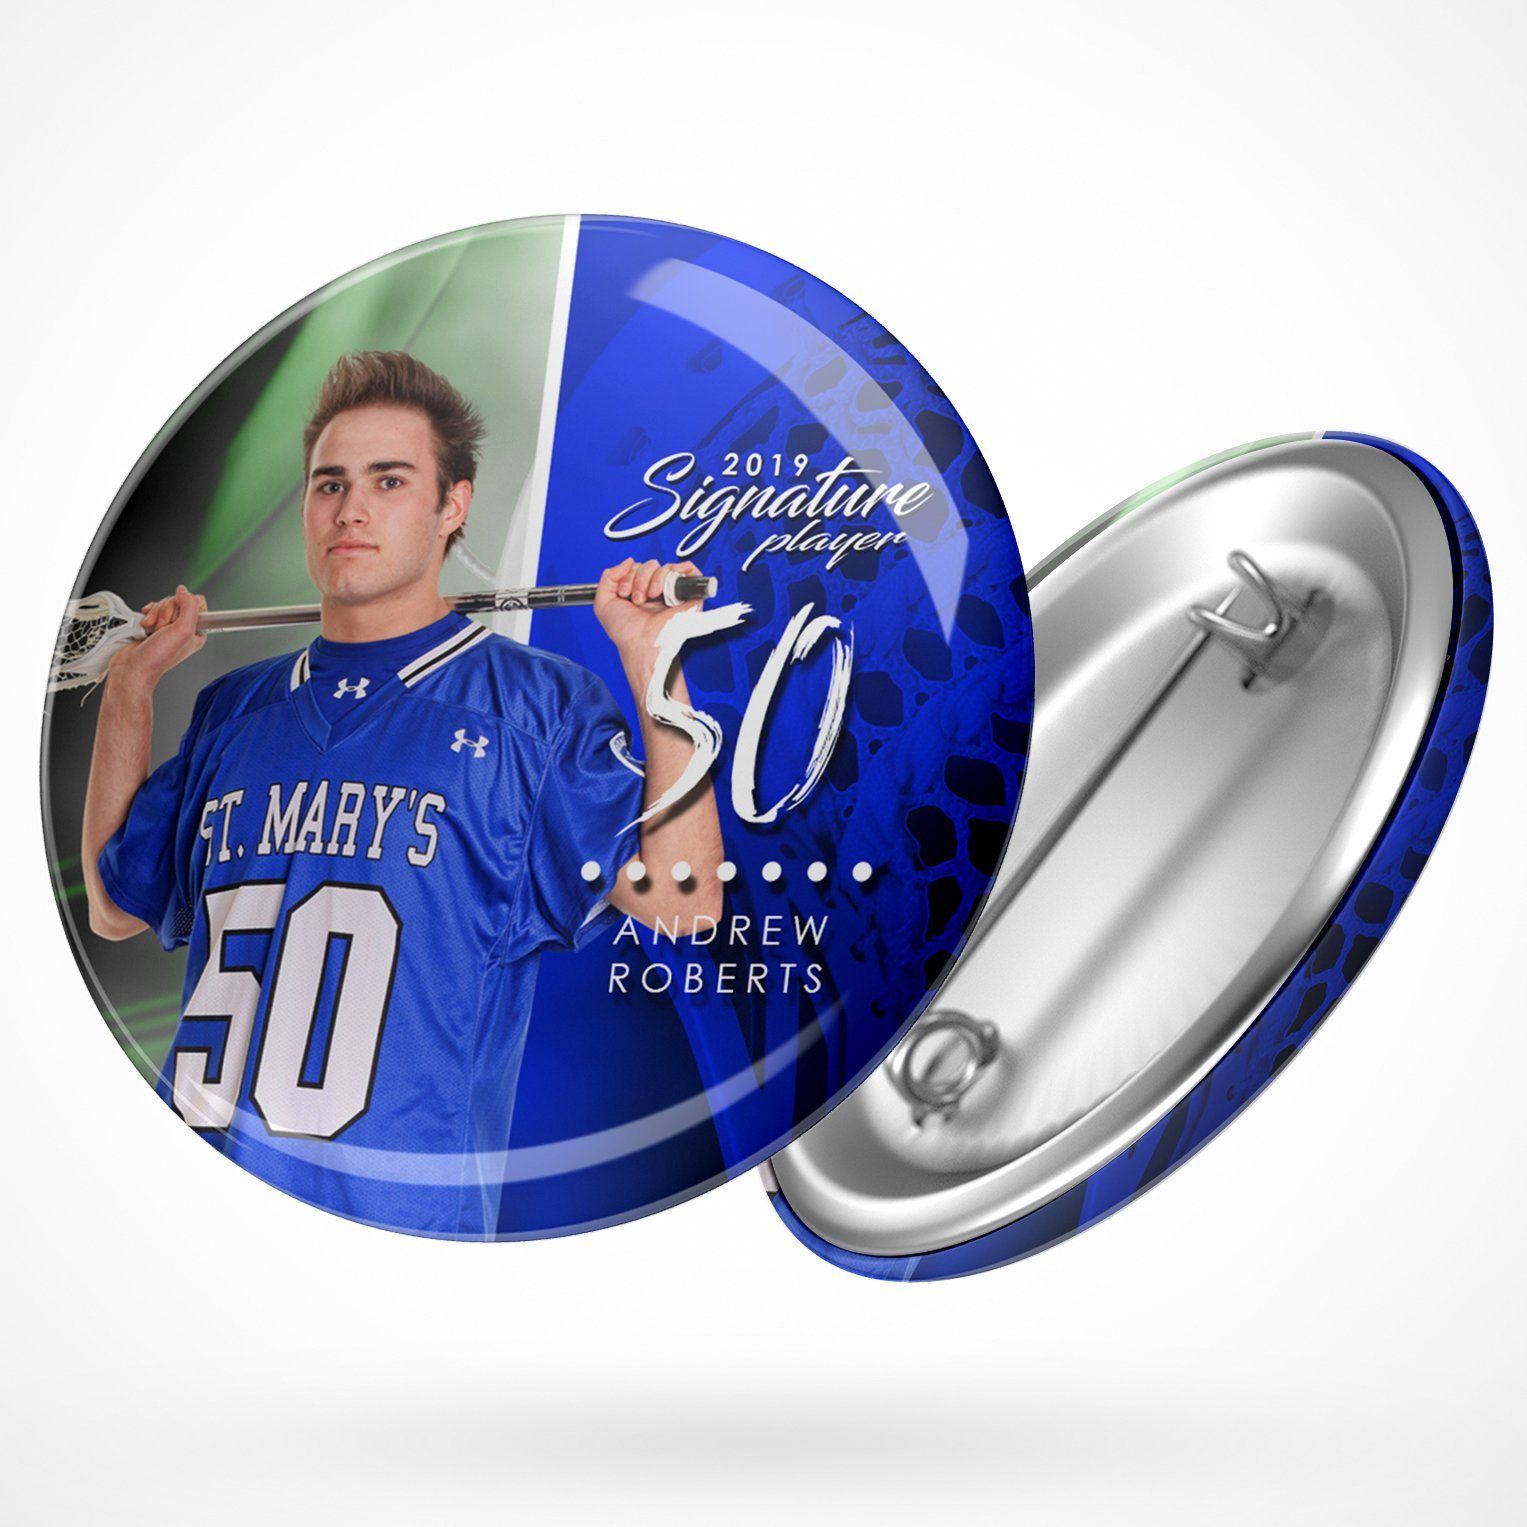 Signature Player - Lacrosse - V1 - Extraction Button Template-Photoshop Template - Photo Solutions